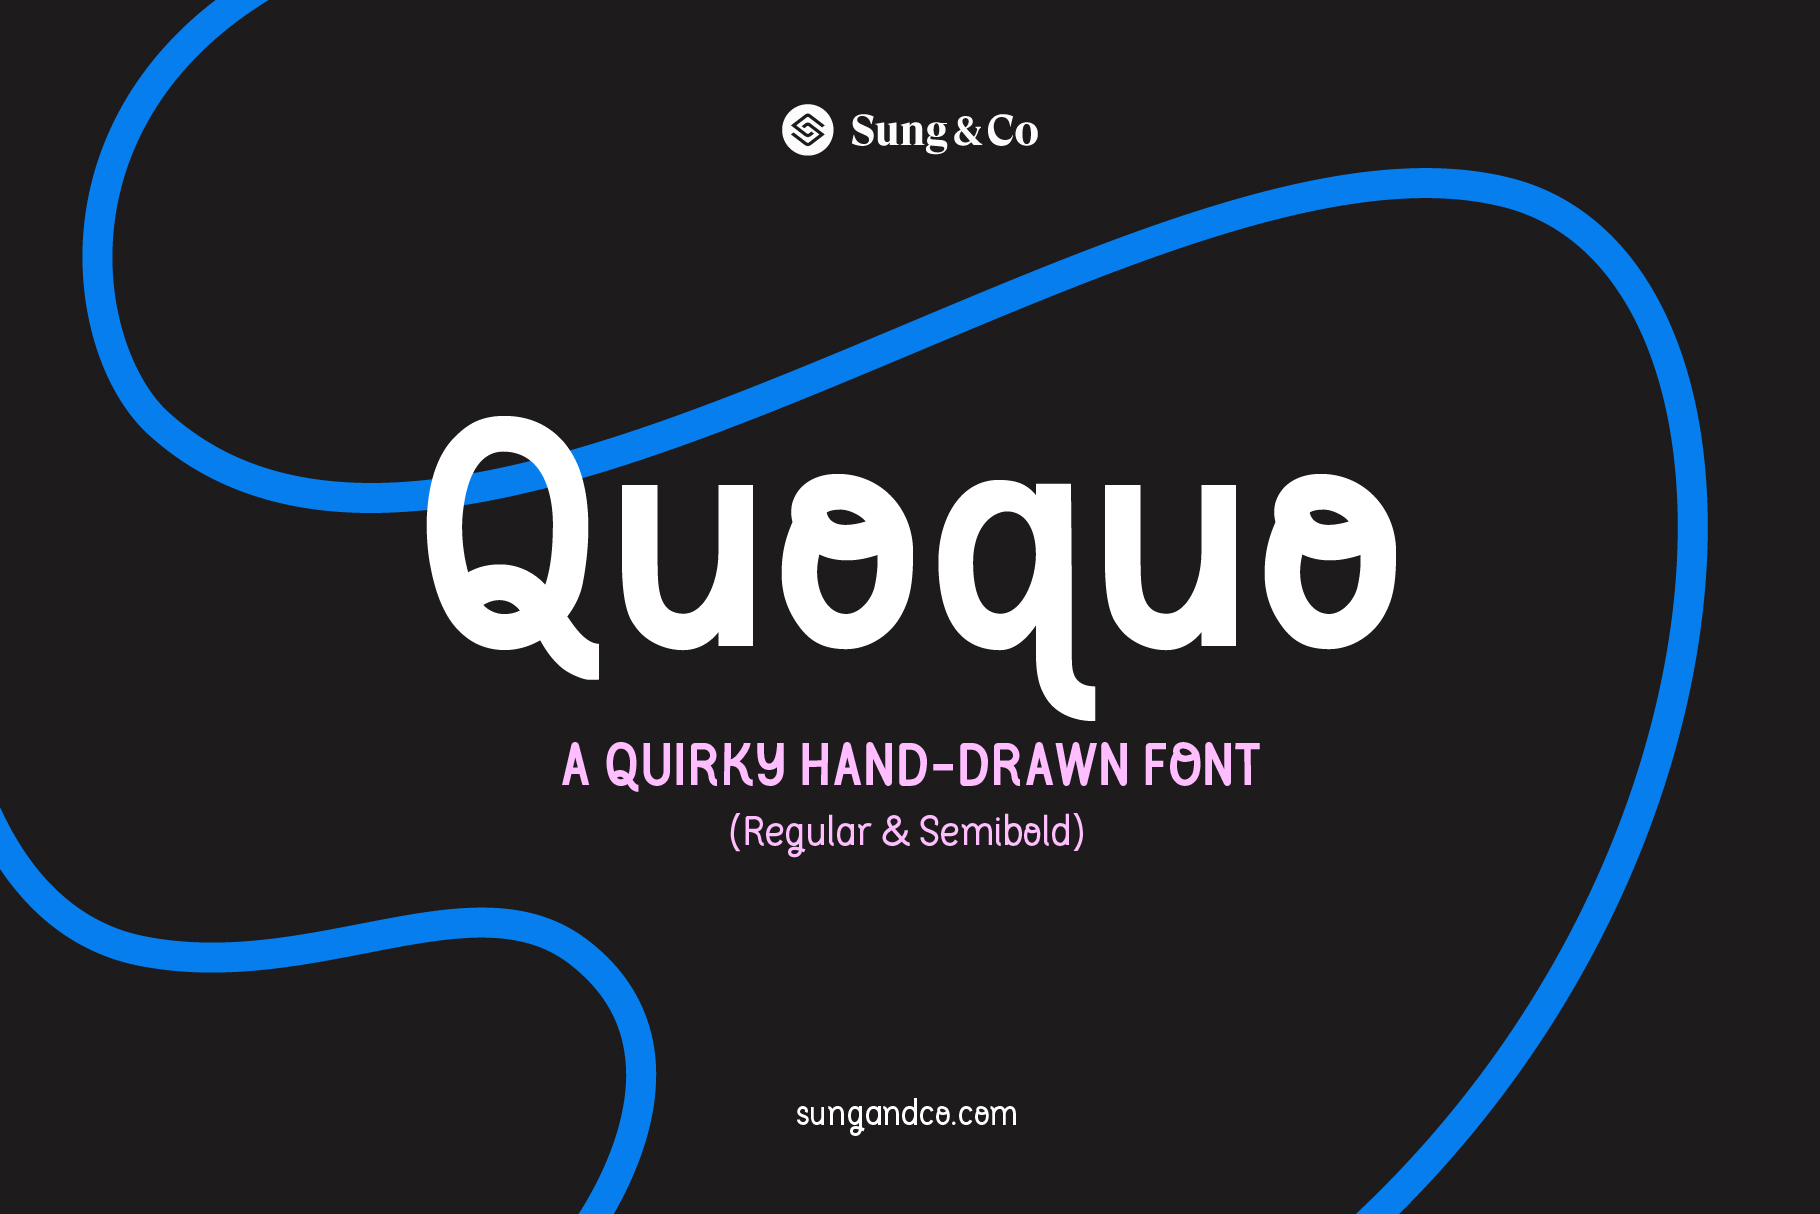 Purchase Quoquo, a quirky hand-drawn font created by Sung & Co.